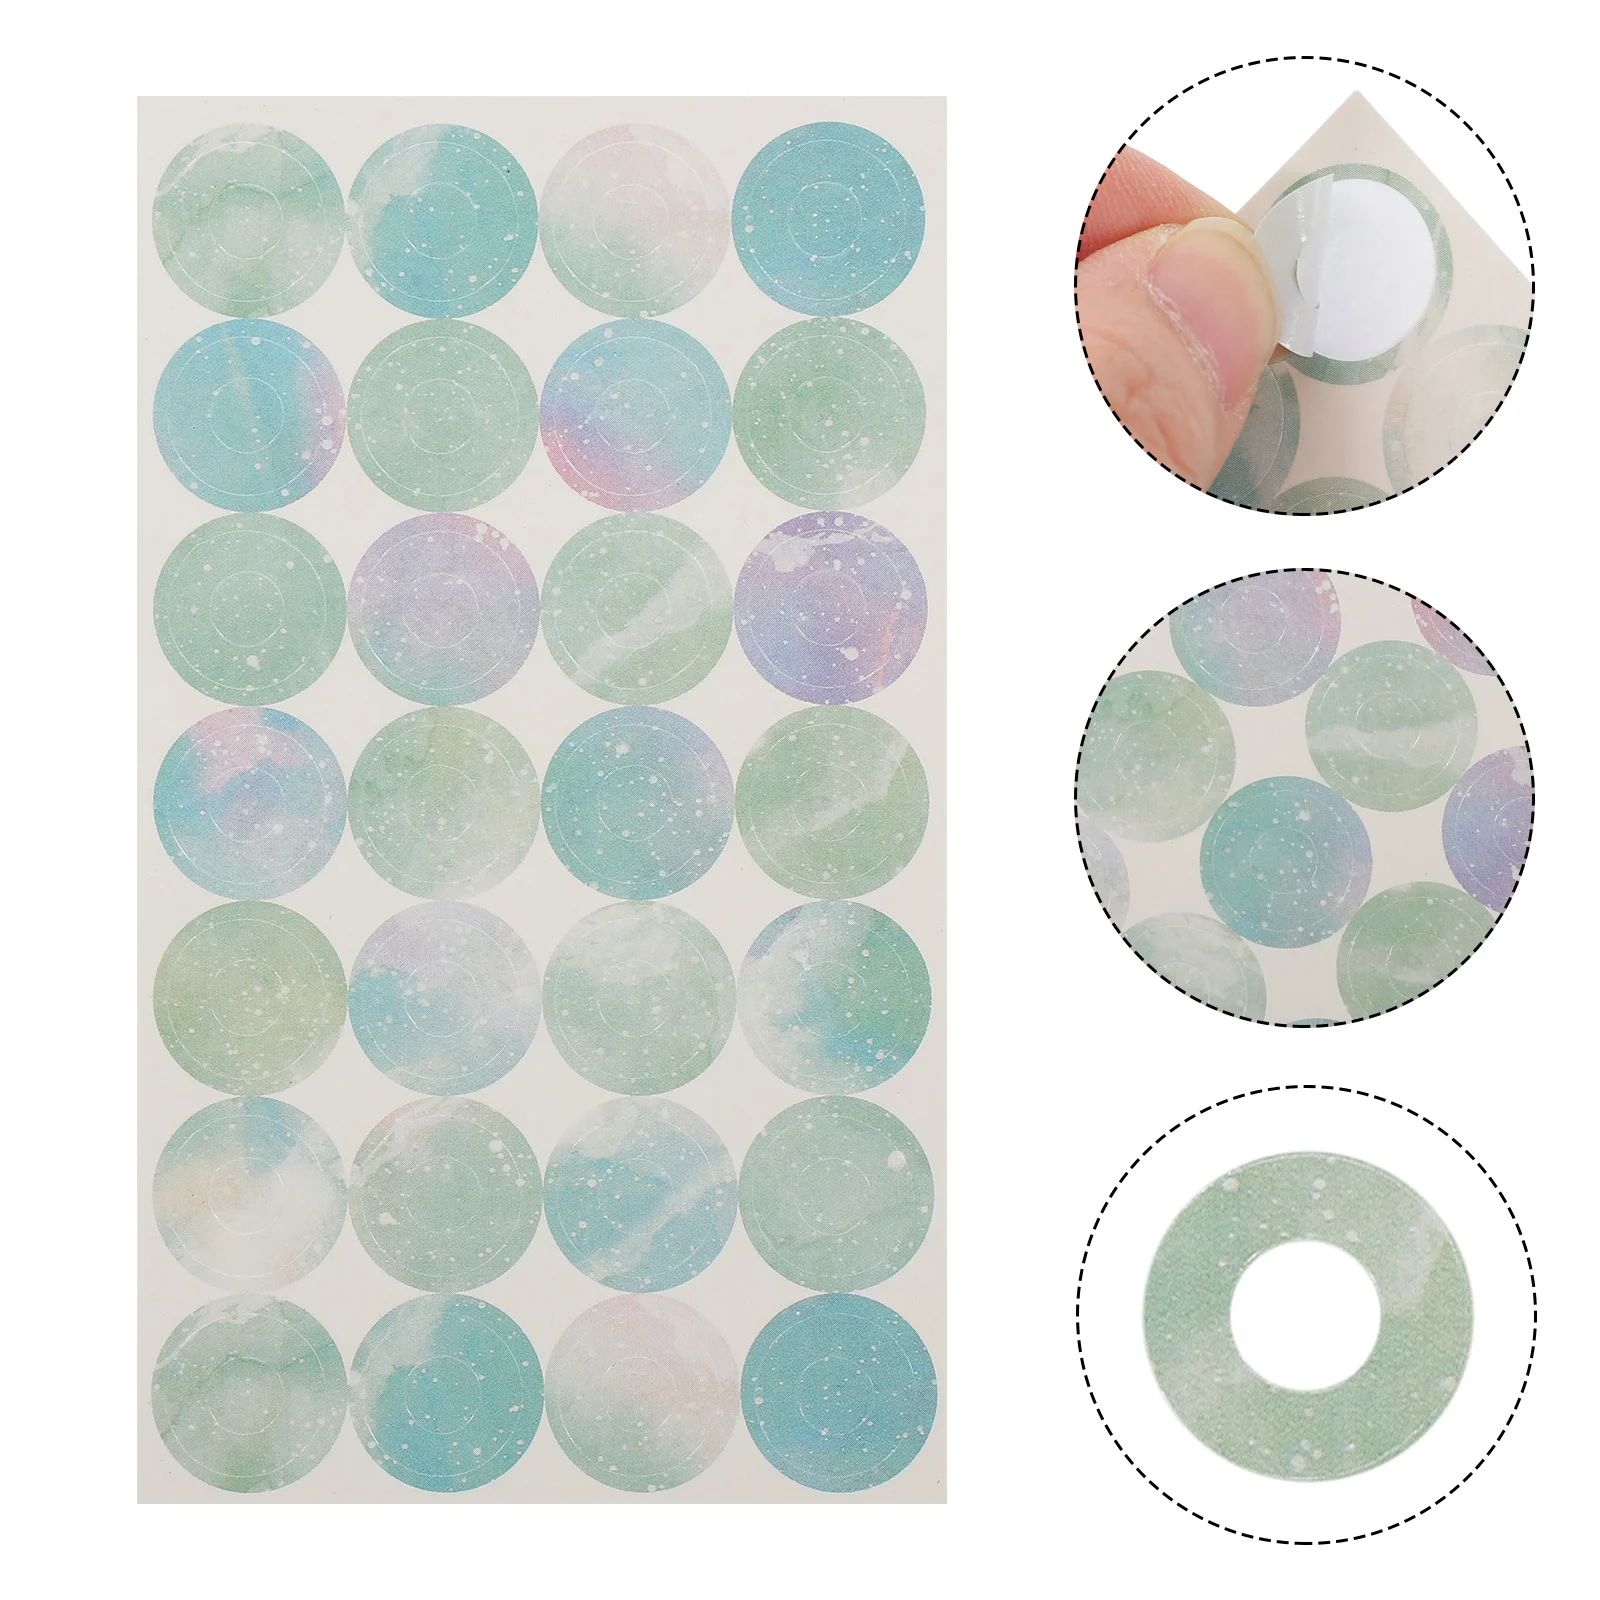 

20 Sheets Loose-leaf Hole Patching Stickers Paper Reinforcement Circles Binder Round Reinforcements Tag Hole-punched Pages